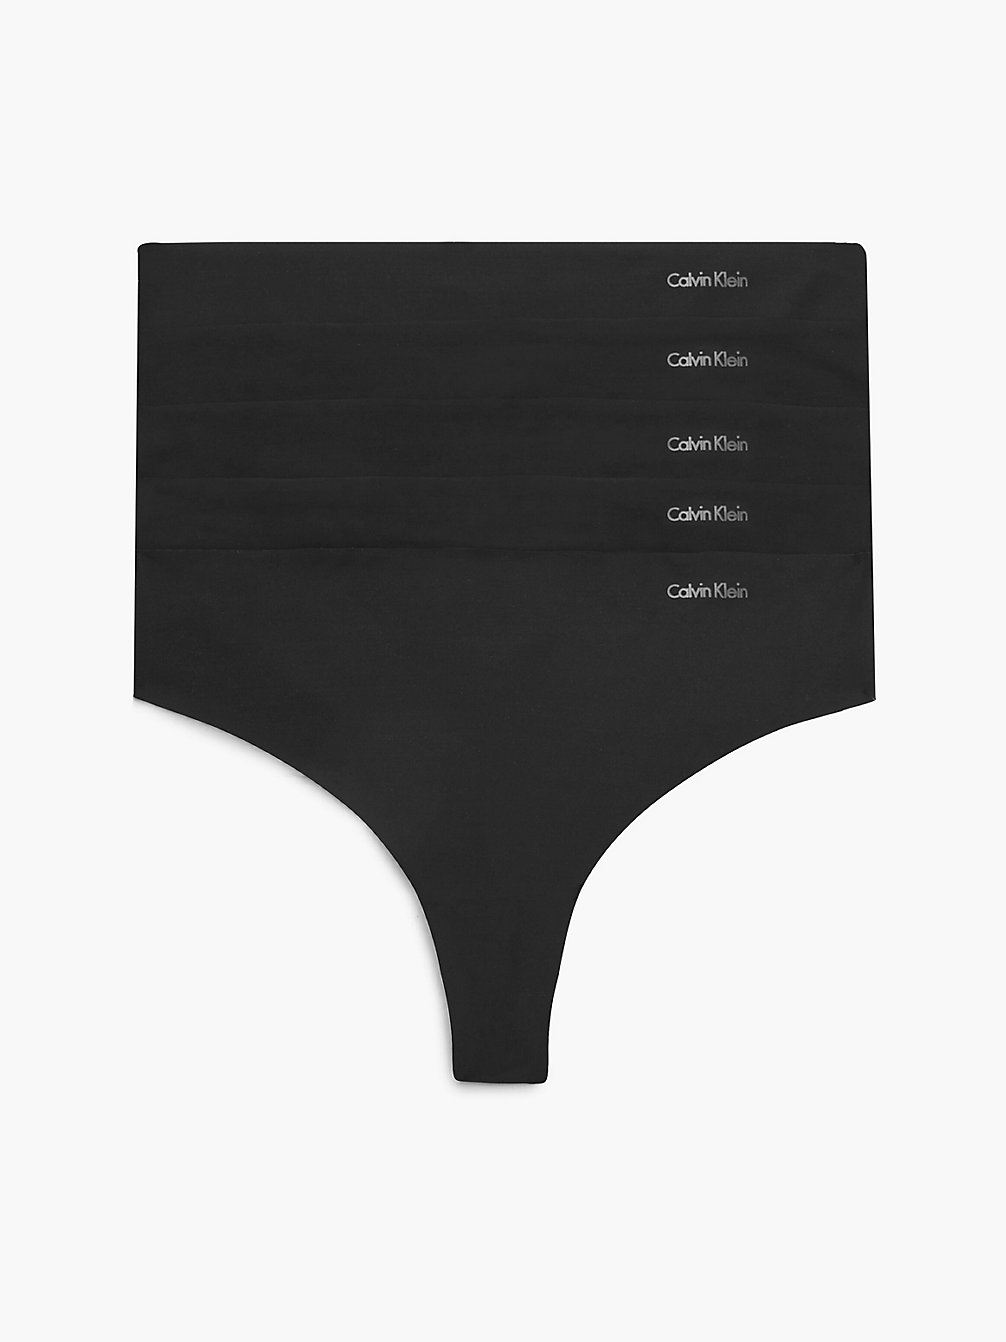 Pack De 5 Tangas - Invisibles > BLACK > undefined mujer > Calvin Klein